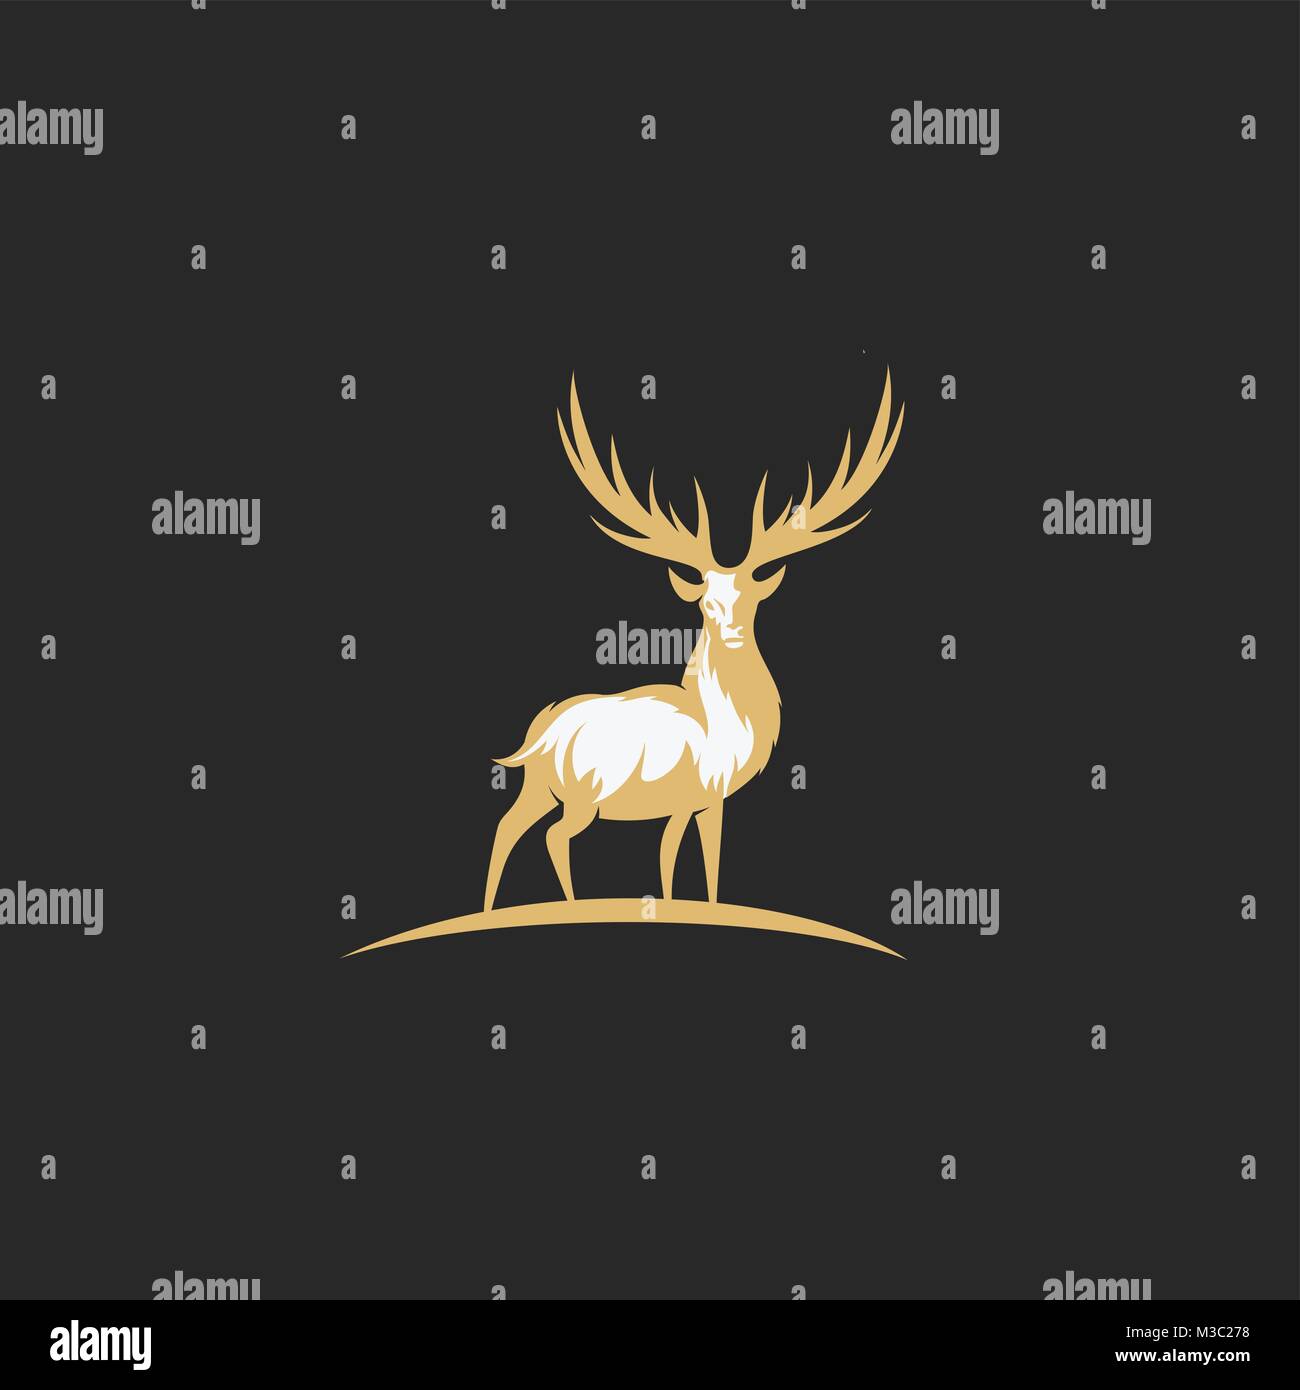 Golden and white chirstmas deer vector illustration. Stock Vector